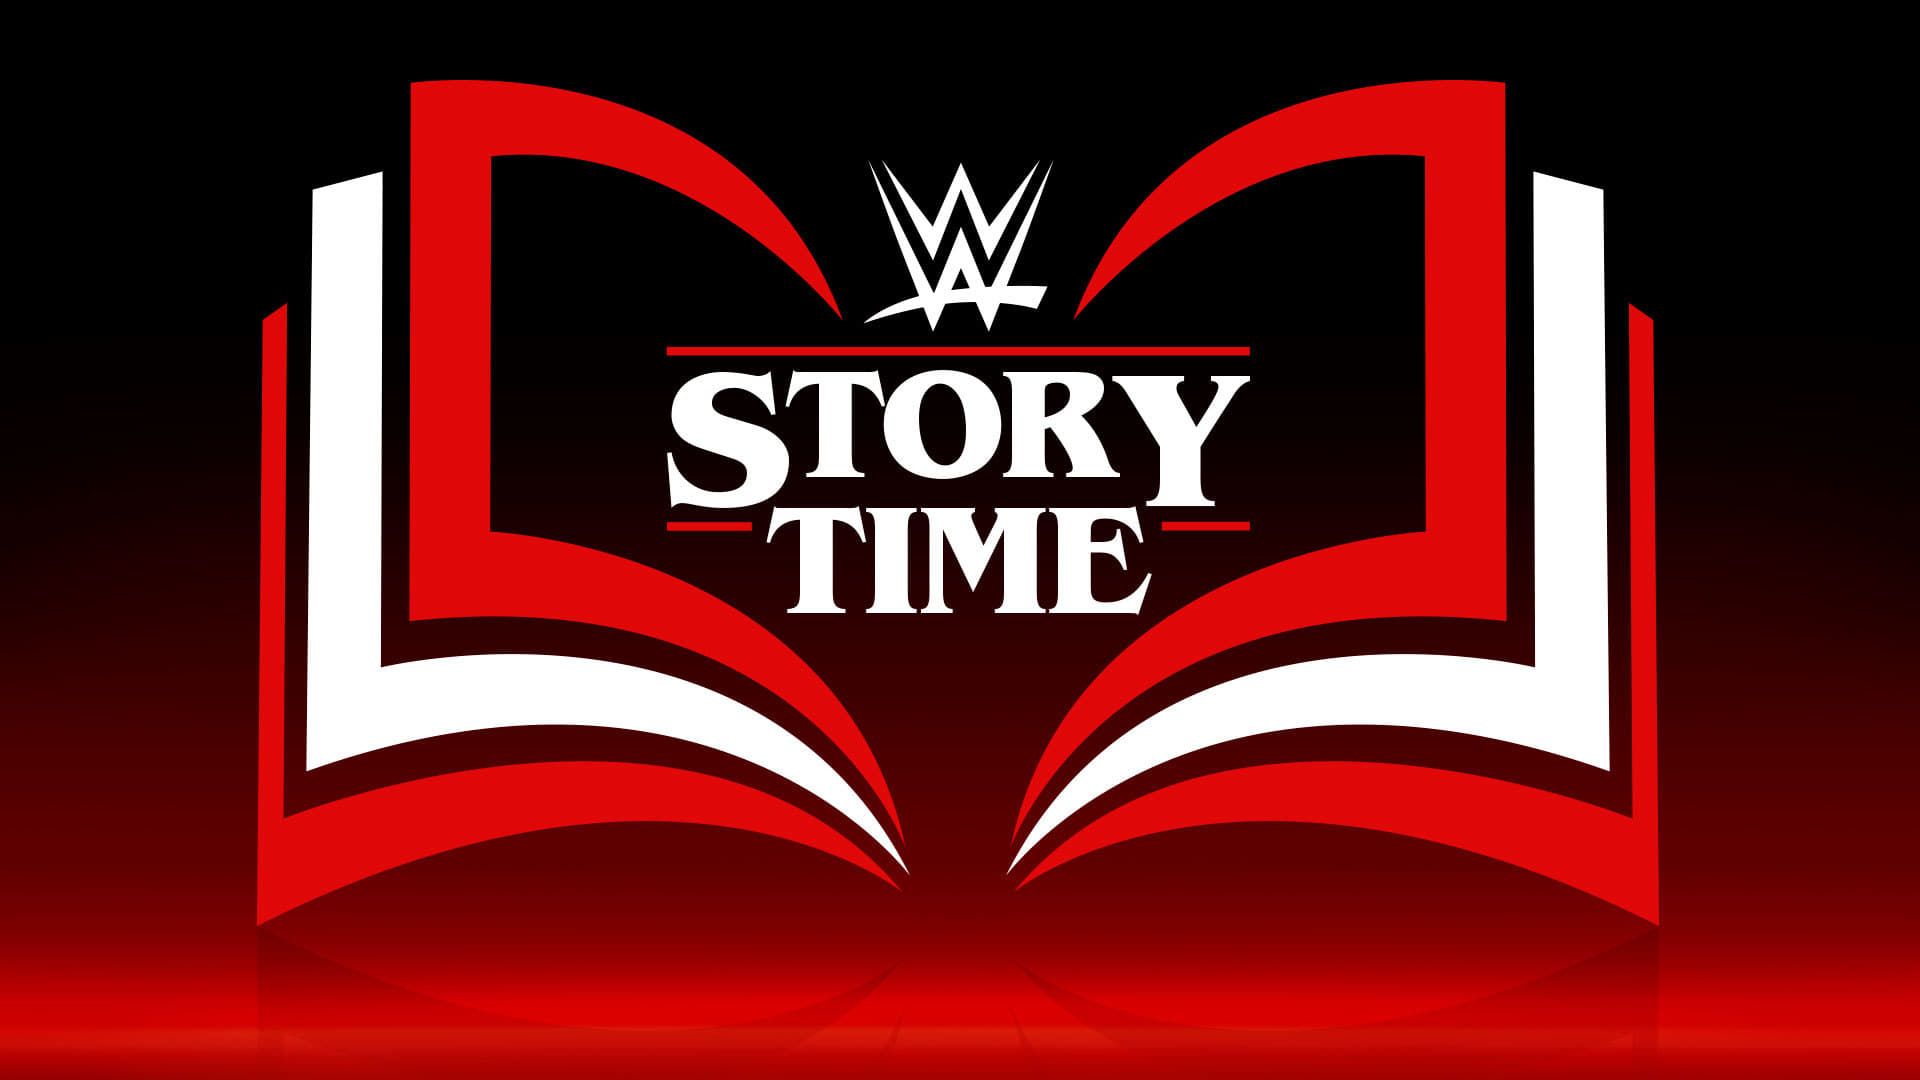 WWE: Story Time background